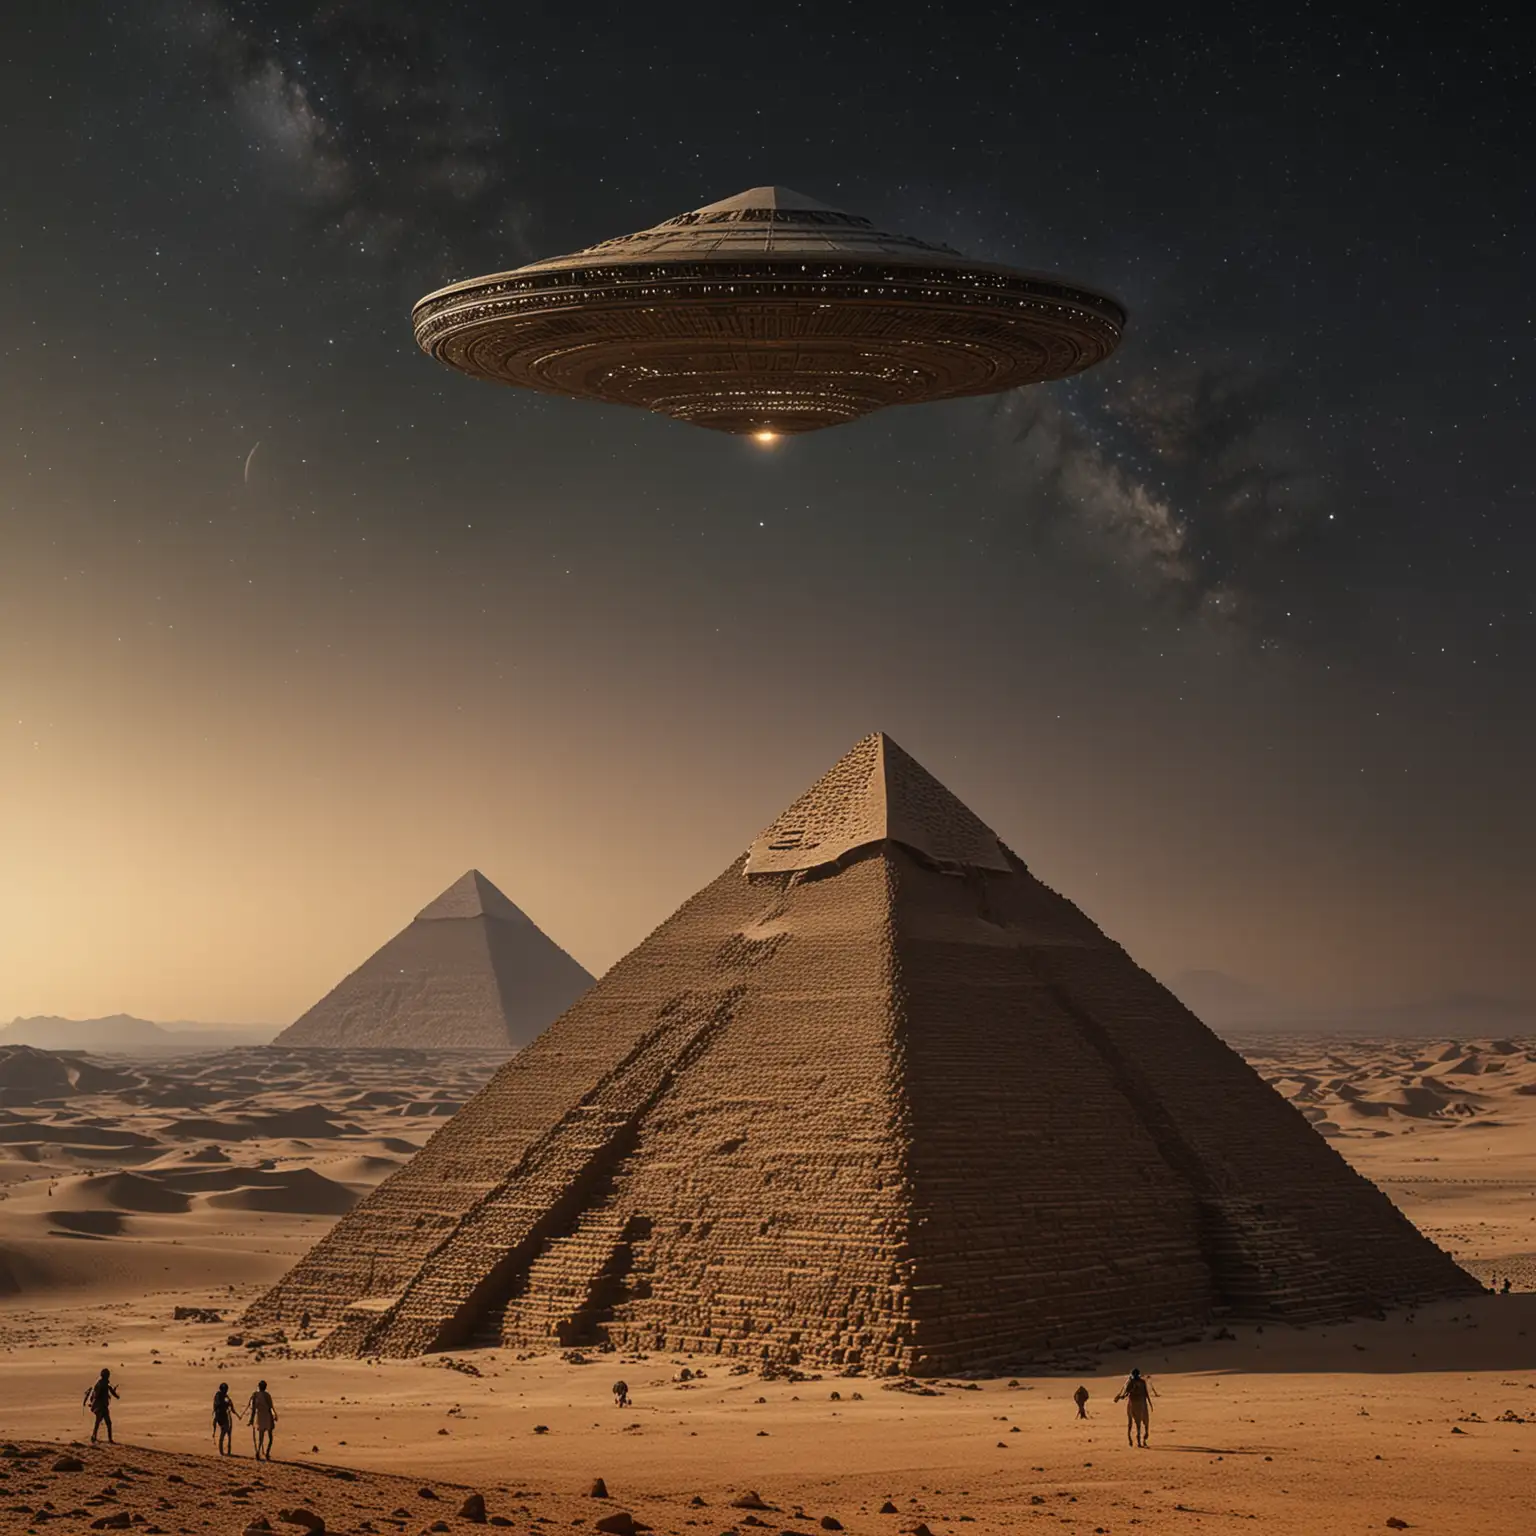 Aliens lend a helping hand in constructing pyramids, while a UFO gracefully glides through the celestial expanse above. /Elaborately describe the scene, exploring its intricacies and details./ Photo taken by Yousuf Karsh with Fujifilm GFX 100S & Fujinon GF 110mm f/2, Award Winning Photography style, Fine Art, Ethereal Lighting, 8K, Ultra-HD, Super-Resolution. --v 5 --q 2